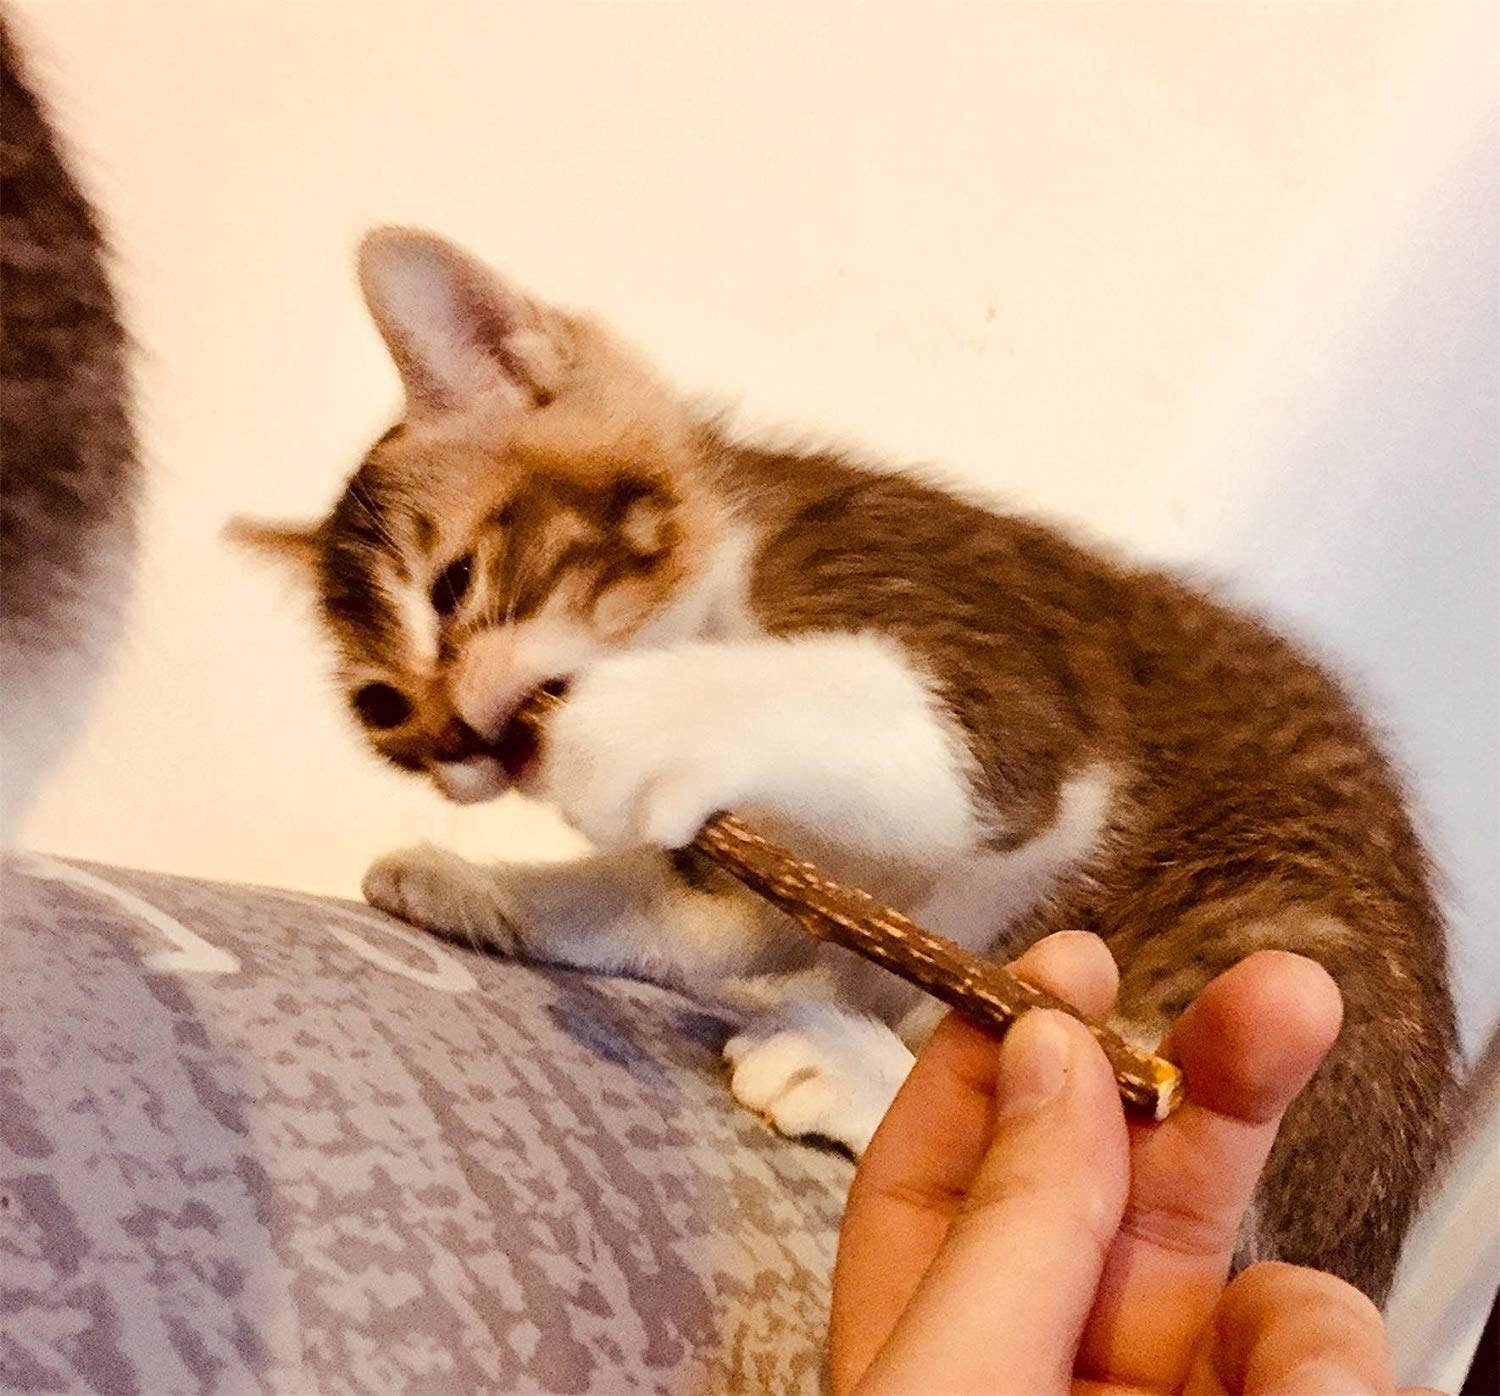 A kitten chewing on a chew stick held by a human hand.